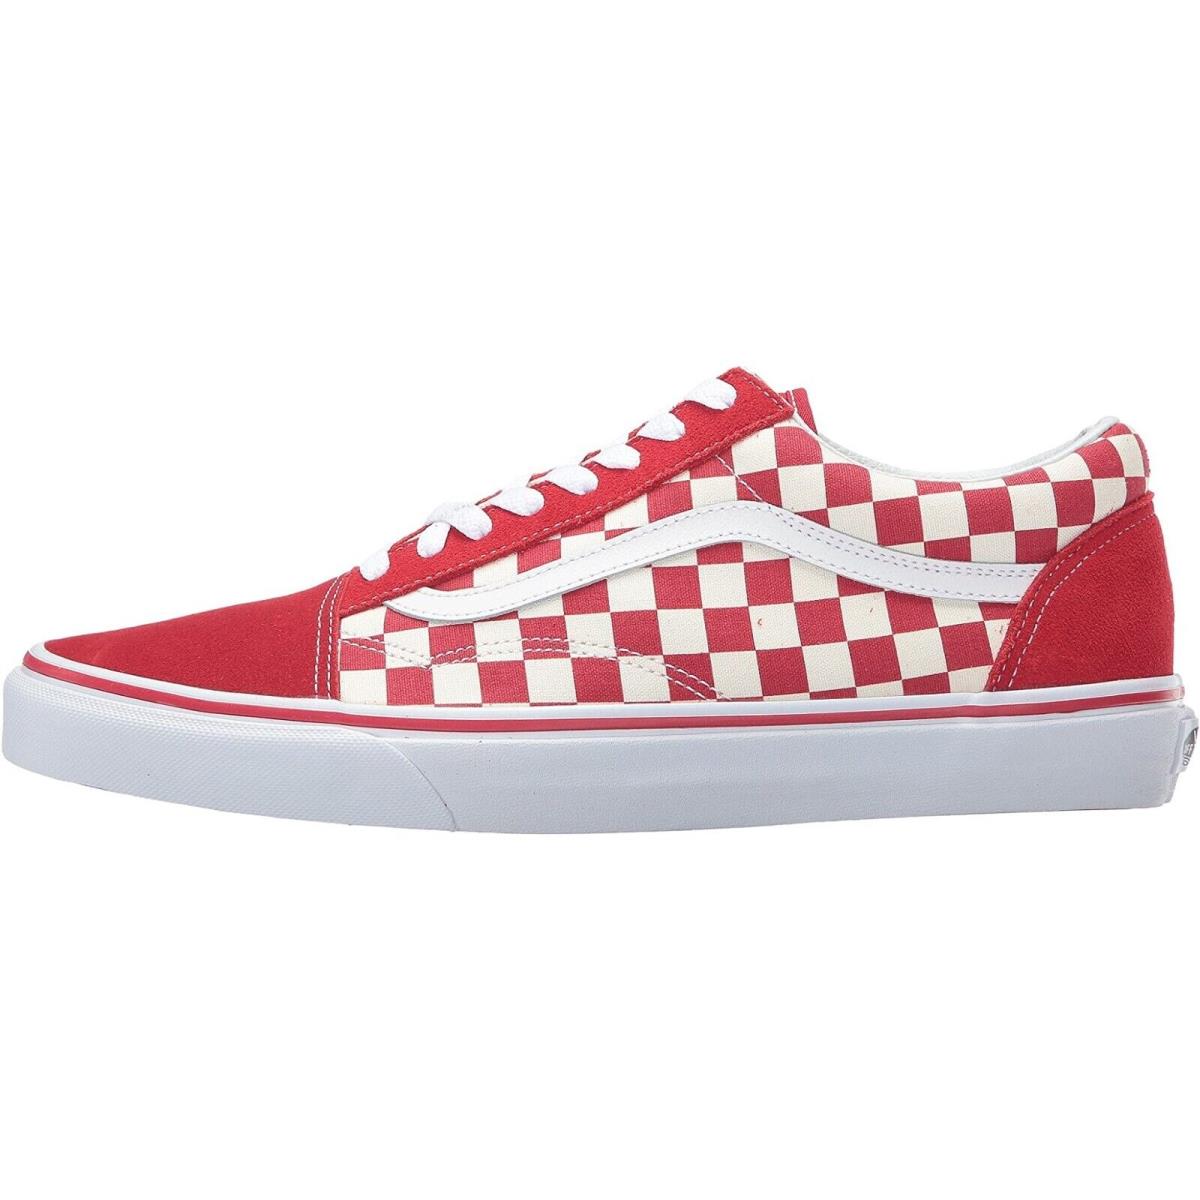 Vans Old Skool Unisex Suede Sneakers Mens Womens Skateboard Canvas Shoes (Primary Check) Racing Red/White